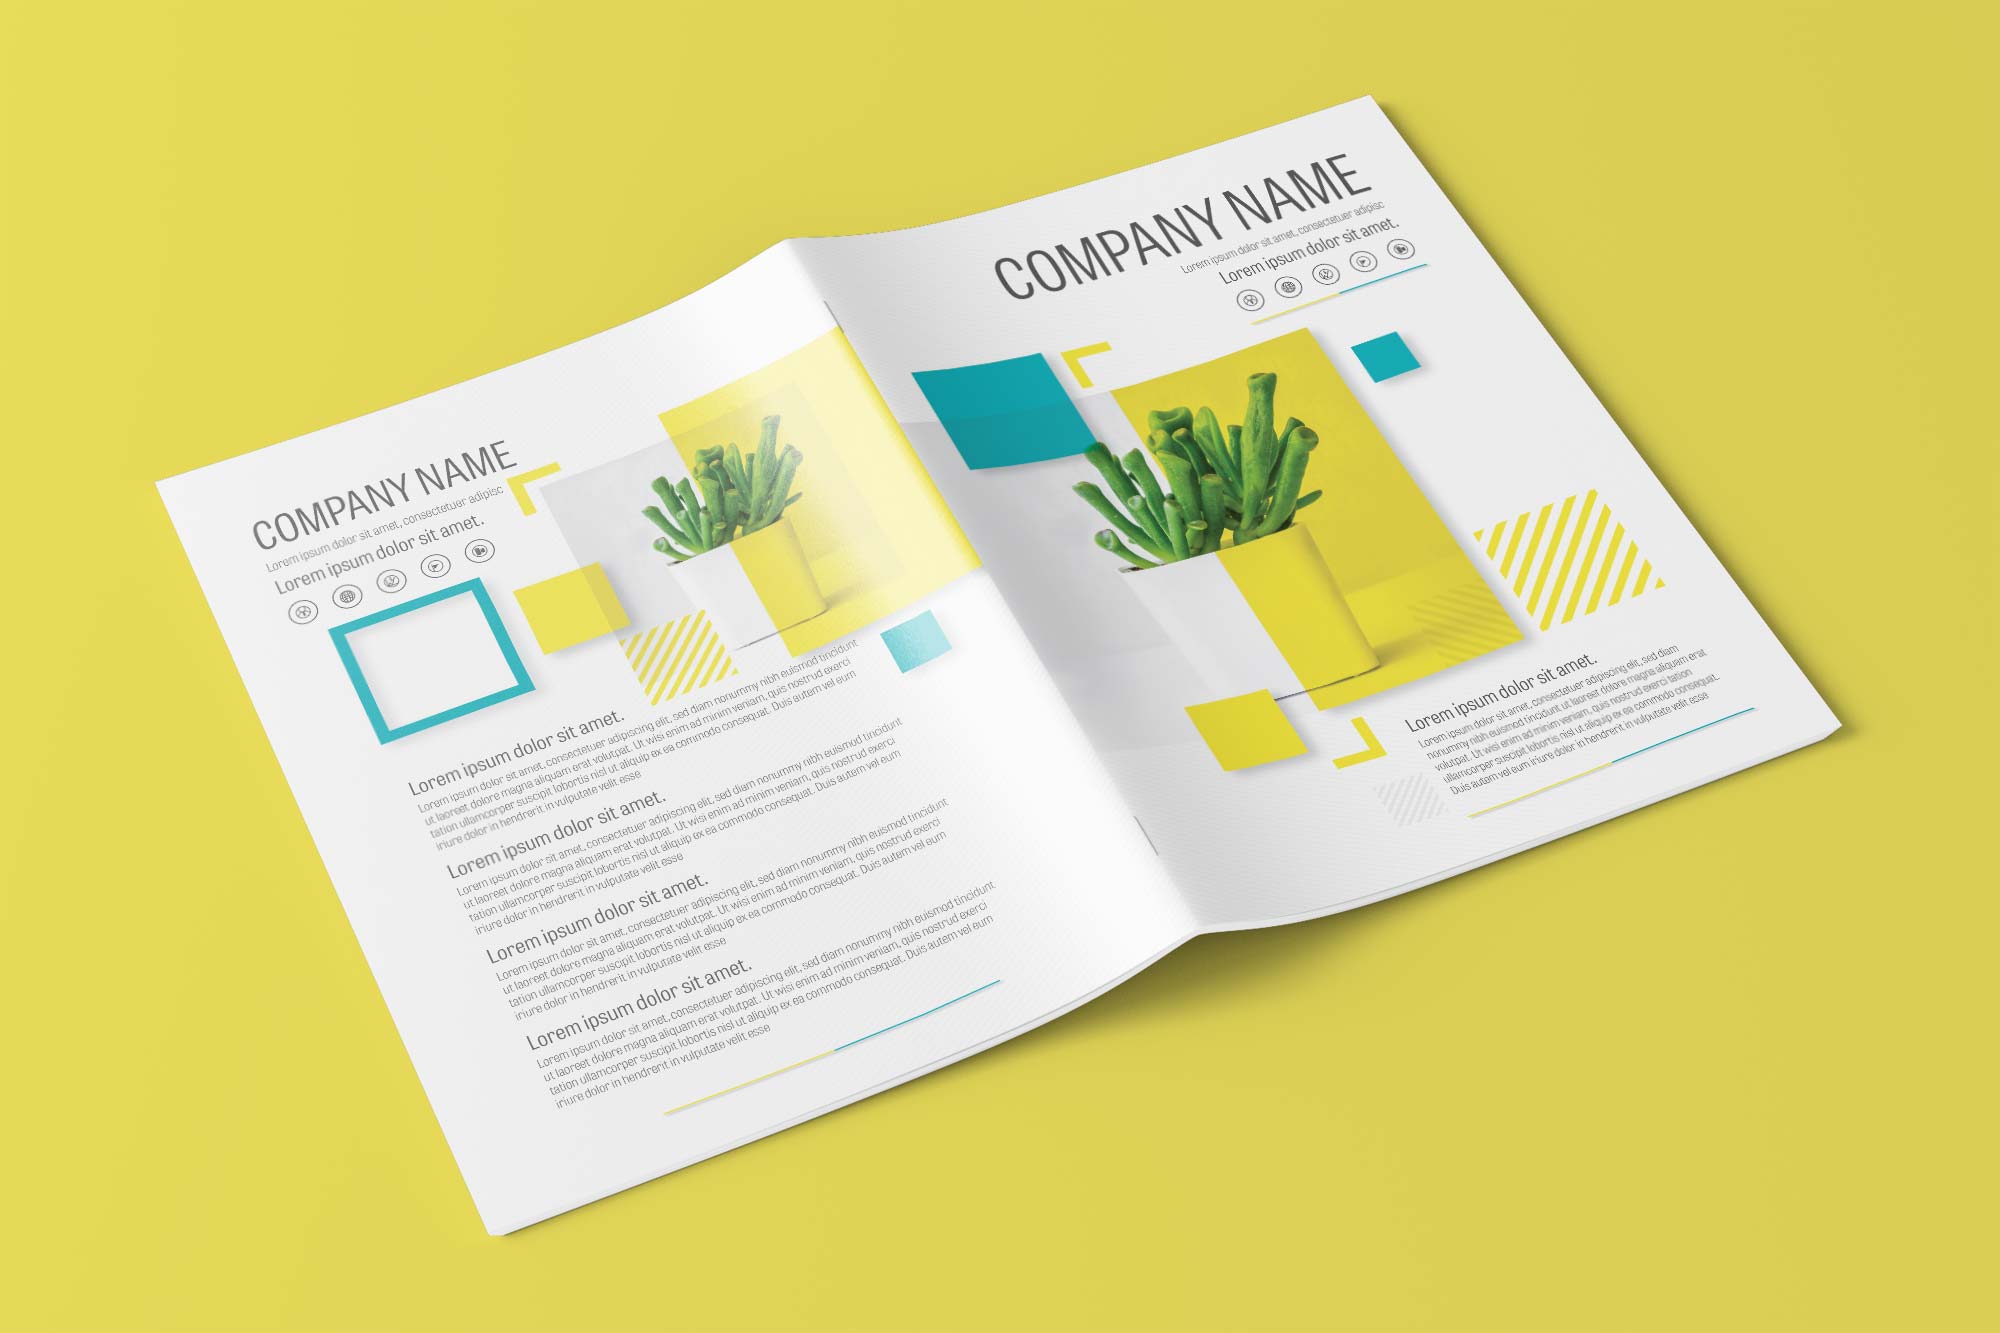 Free-Download-A4-Blue-and-Yellow-Business-Brochure-Layout-Template